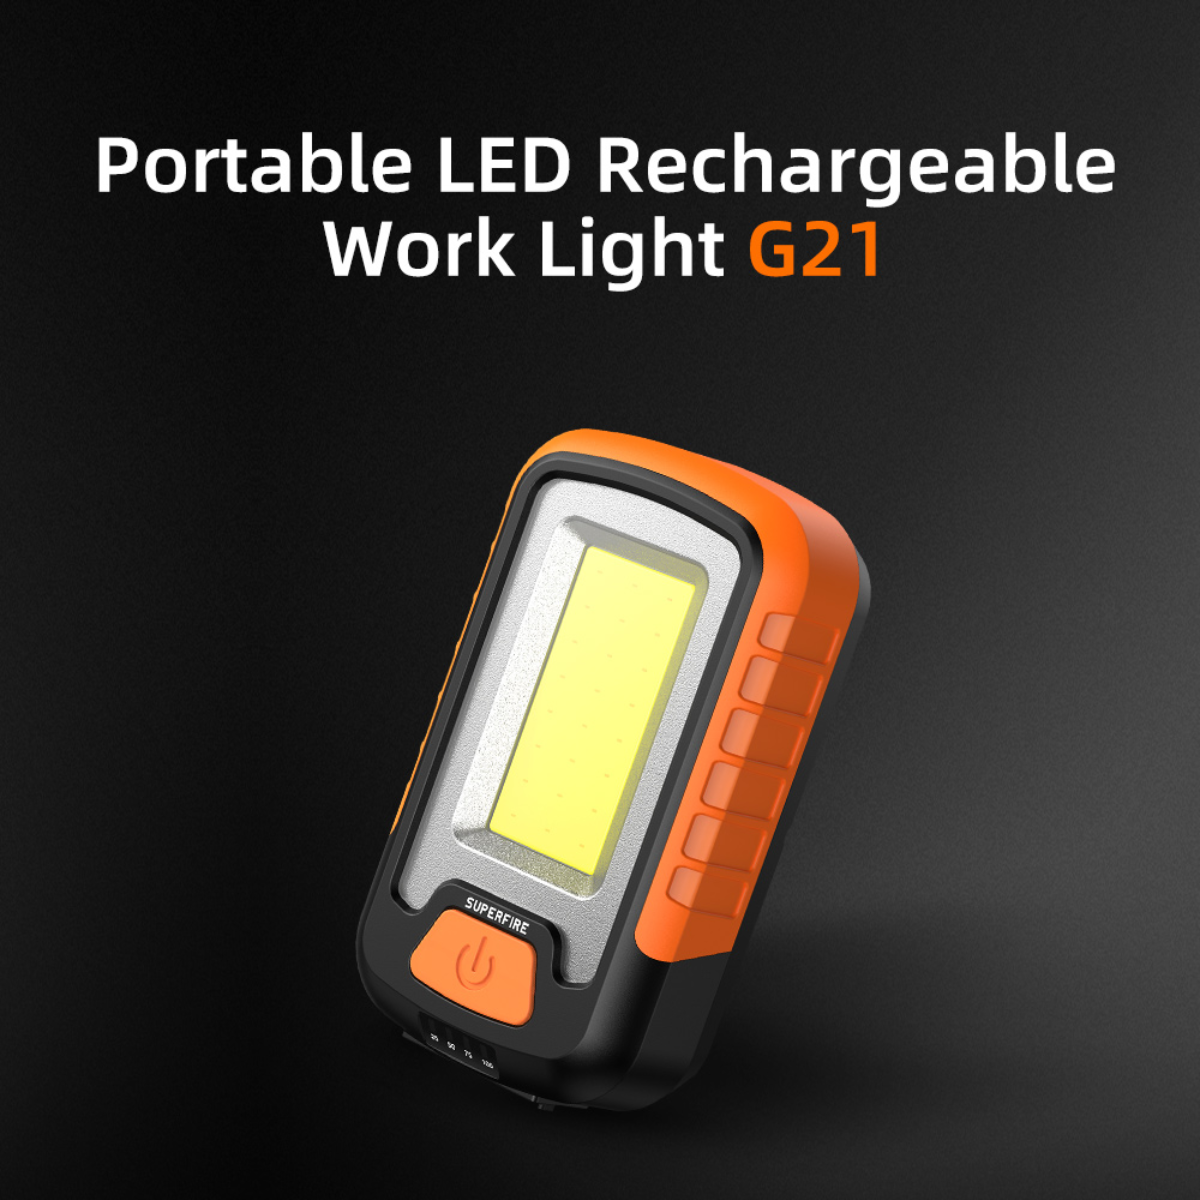 SUPERFIRE: One of The Best LED Work Light On The Market